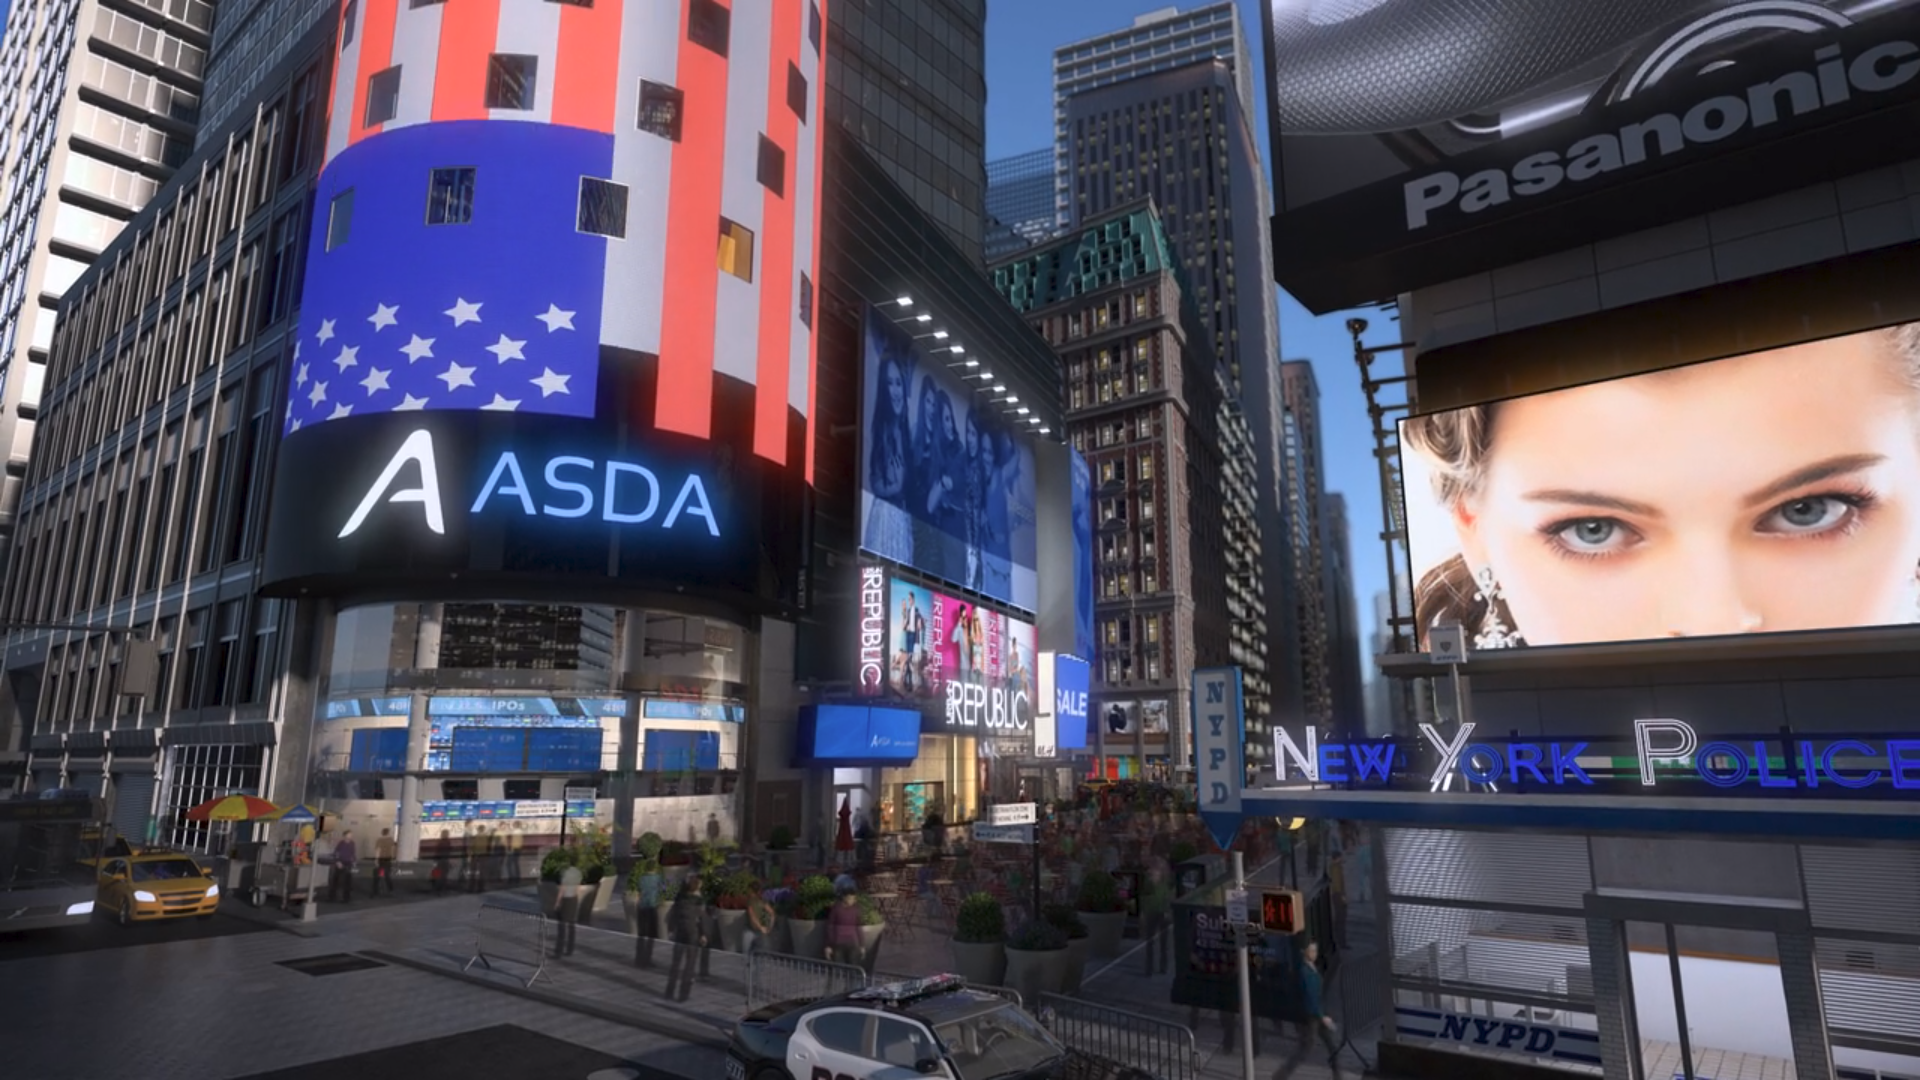 City Animation: Touring Times Square